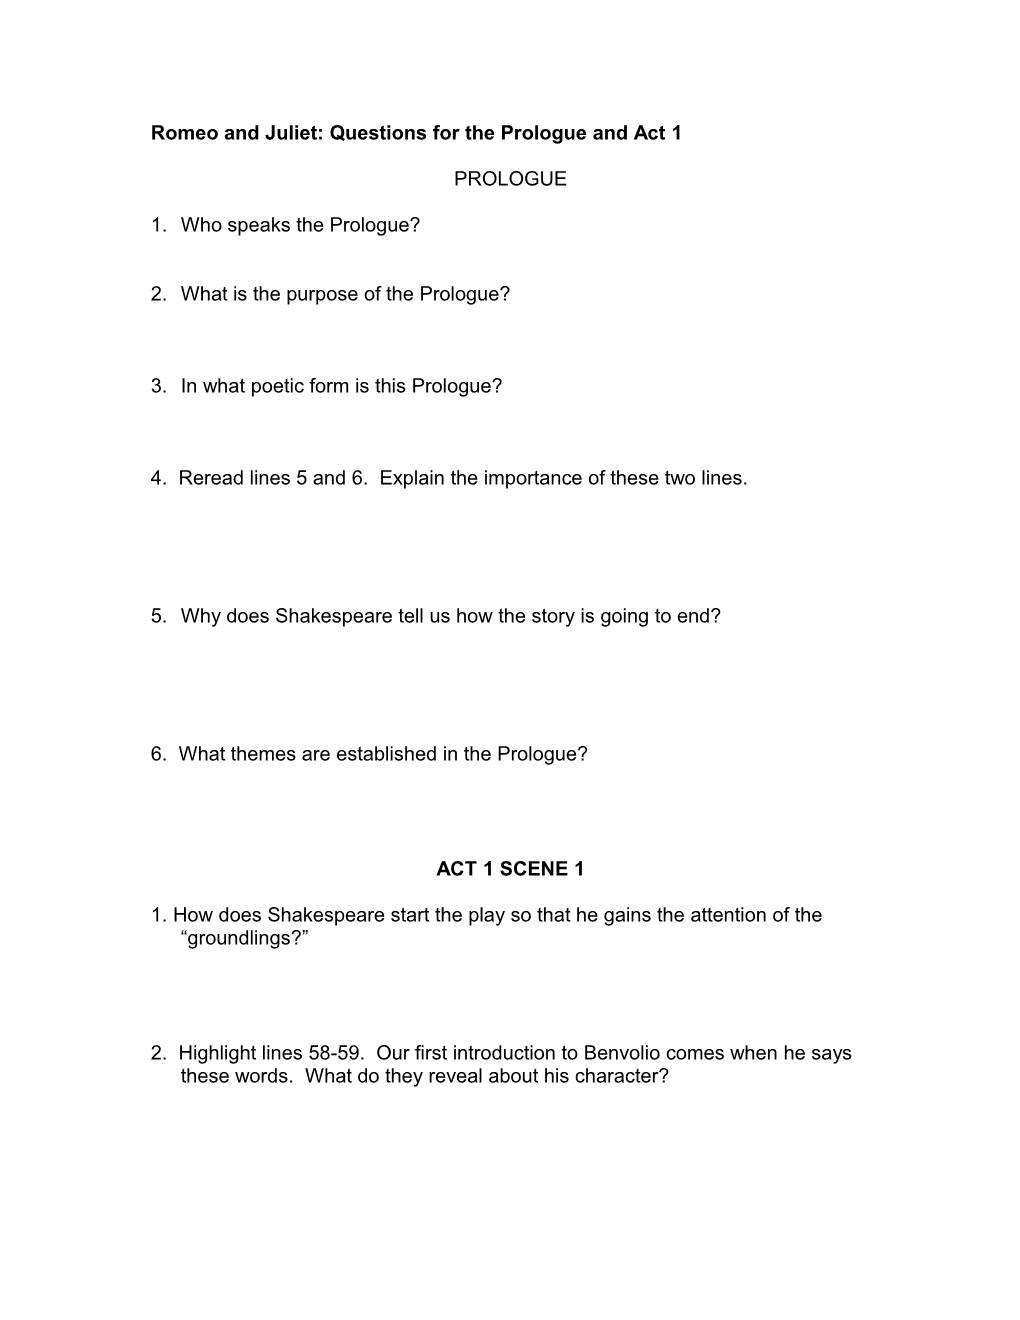 Romeo and Juliet: Questions for the Prologue and Act 1